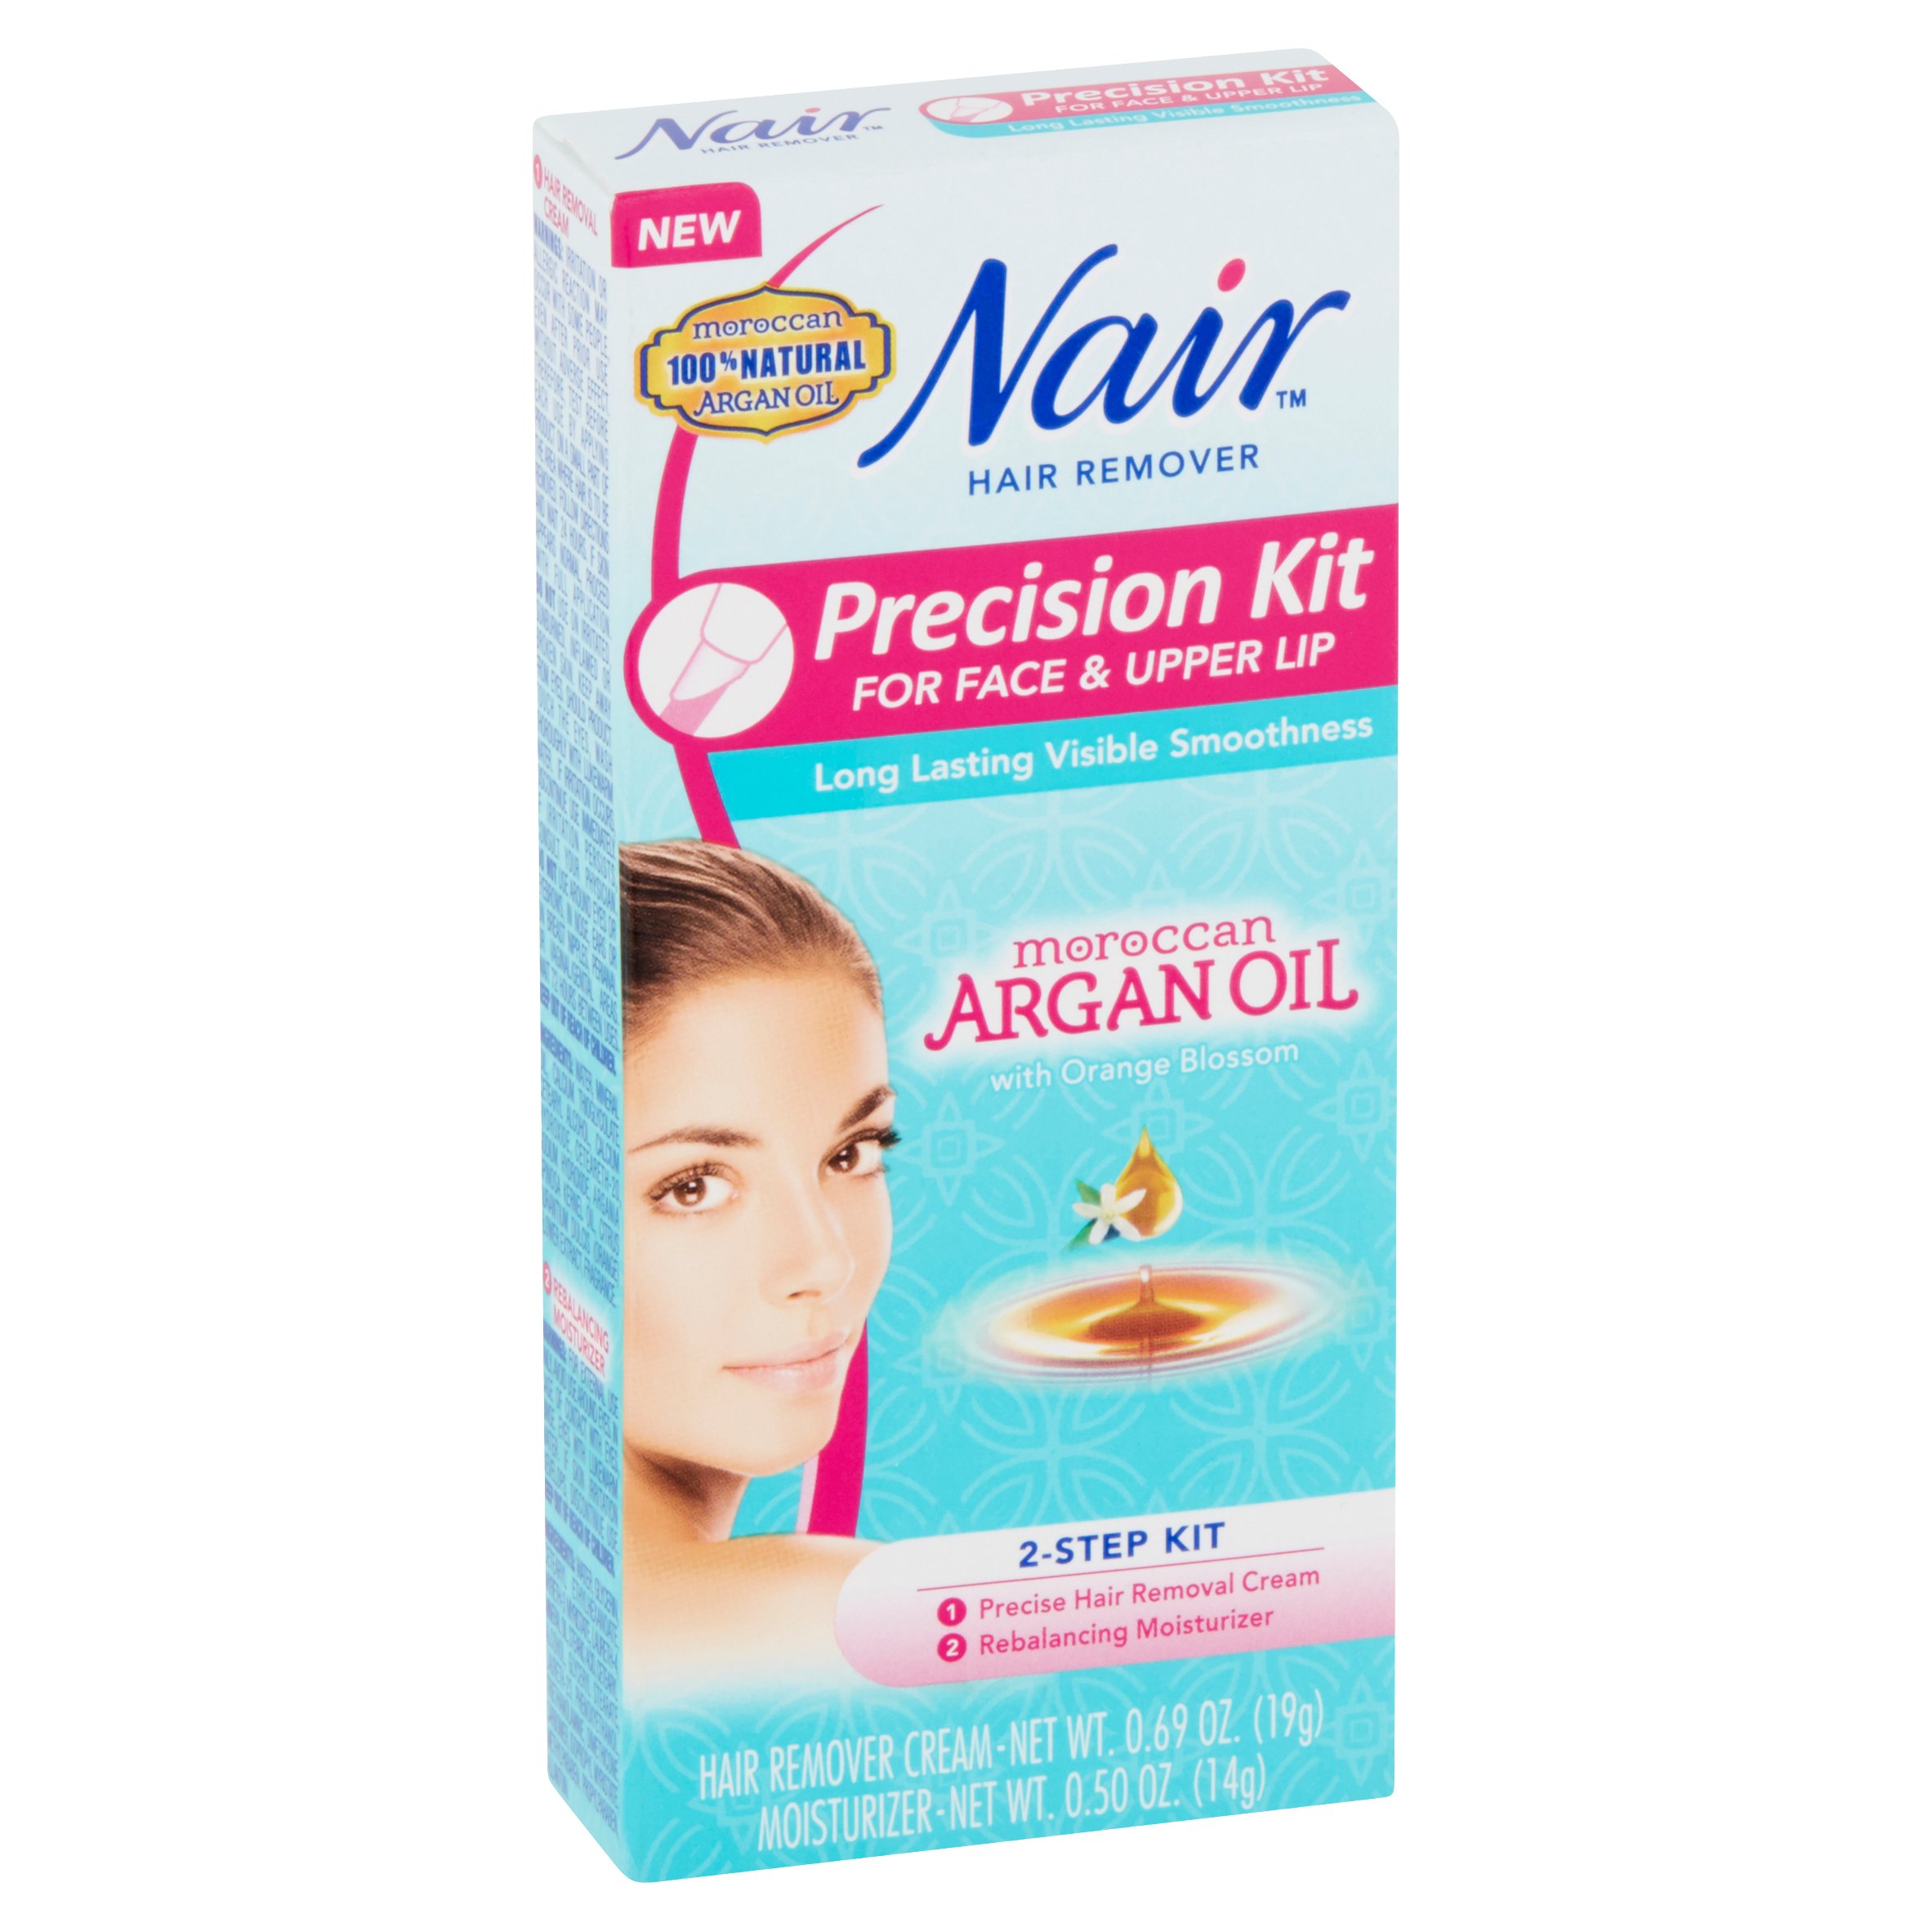 Nair Precision Kit for Face & Upper Lip Hair Remover - image 3 of 6